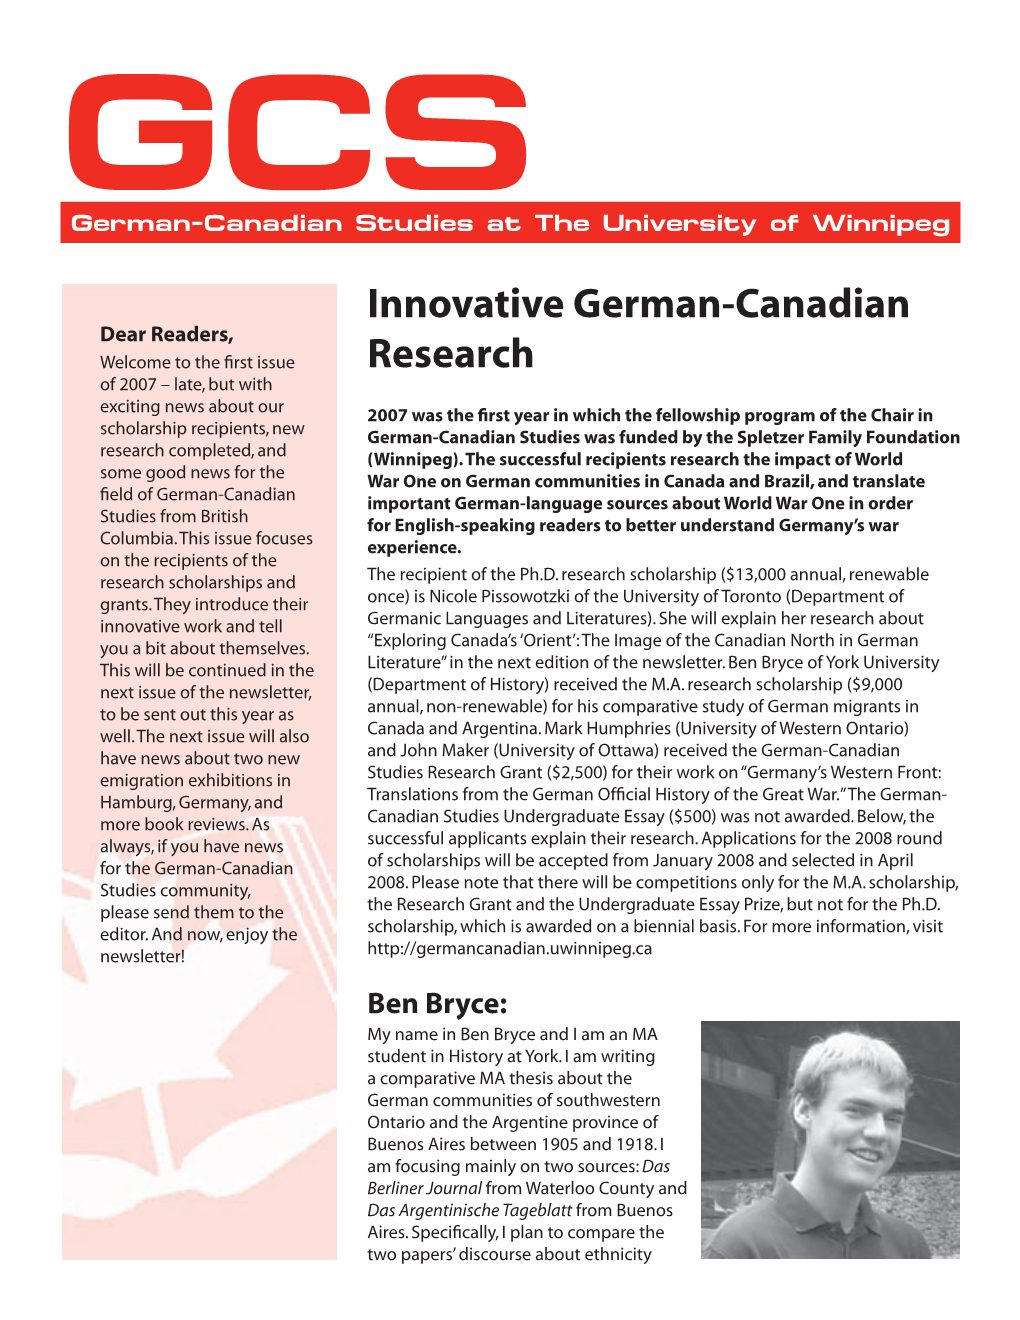 Innovative German-Canadian Research